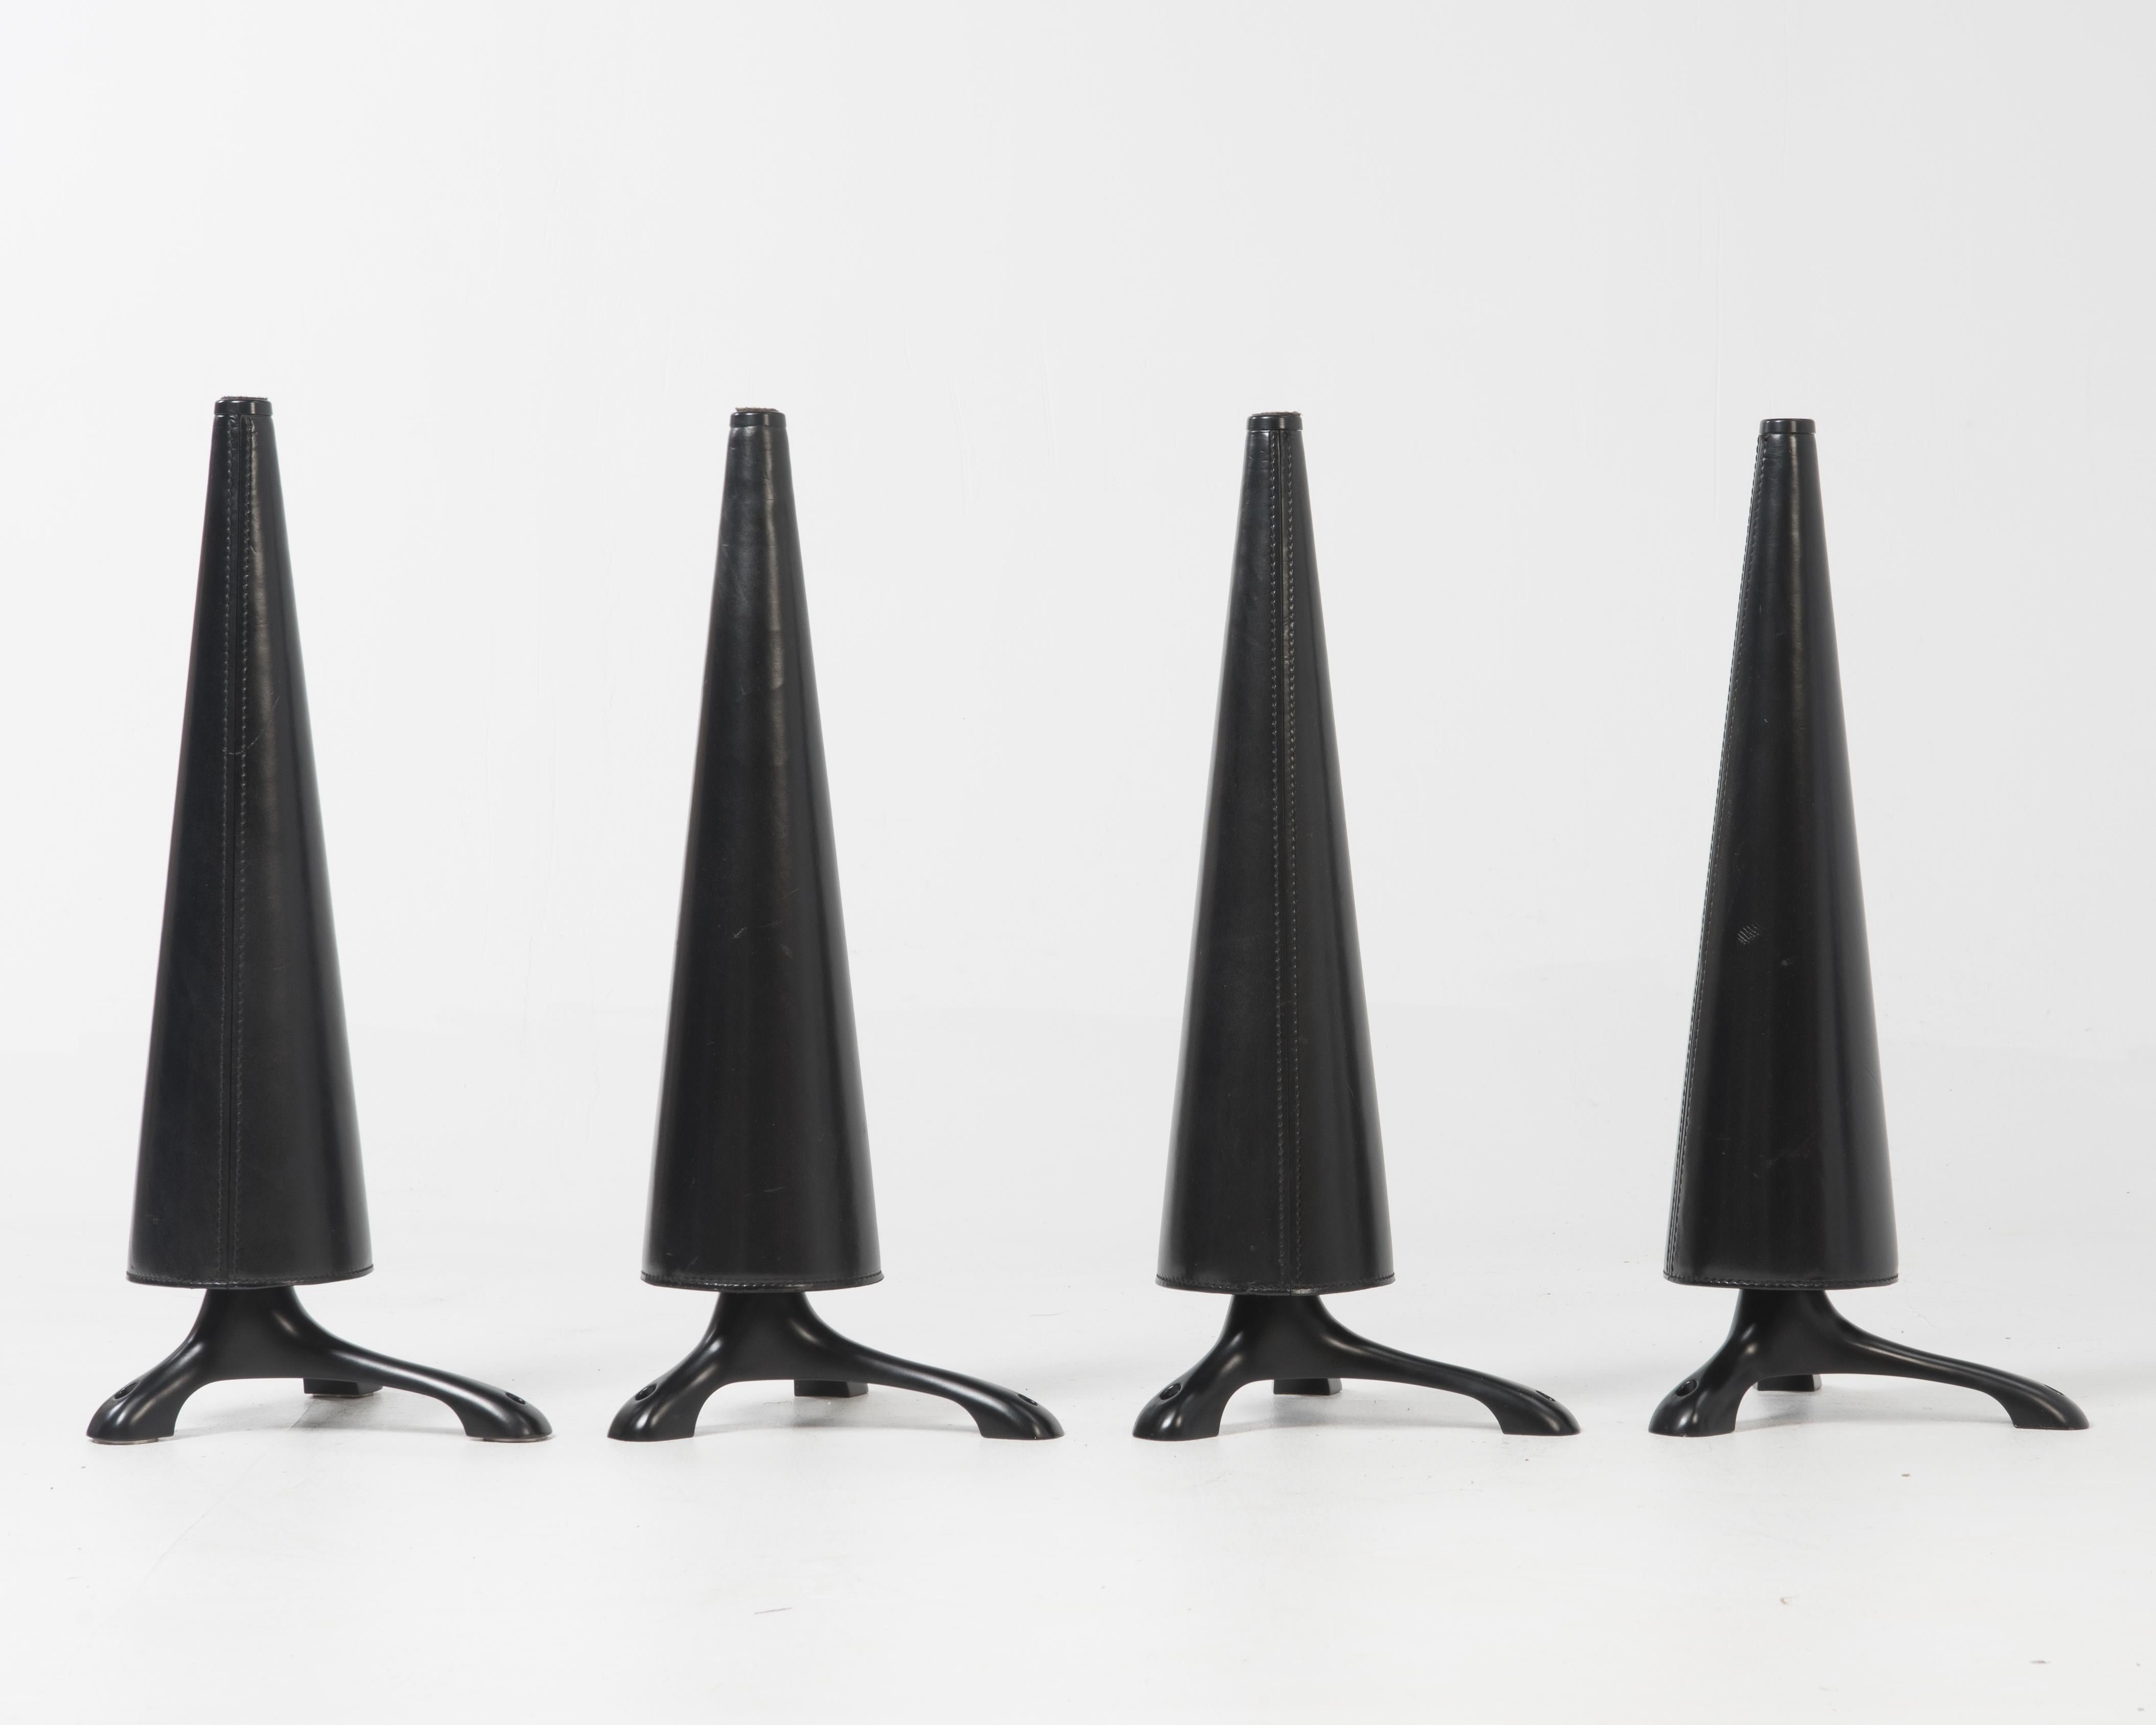 Four screw-on conical legs for the Oskar (or Oscar) table designed by Isoa Hosoe for Cassina in 1991.

Each leg has three contact points to attach the legs to a glass table top. The fifth photograph shows the three screw on discs that any